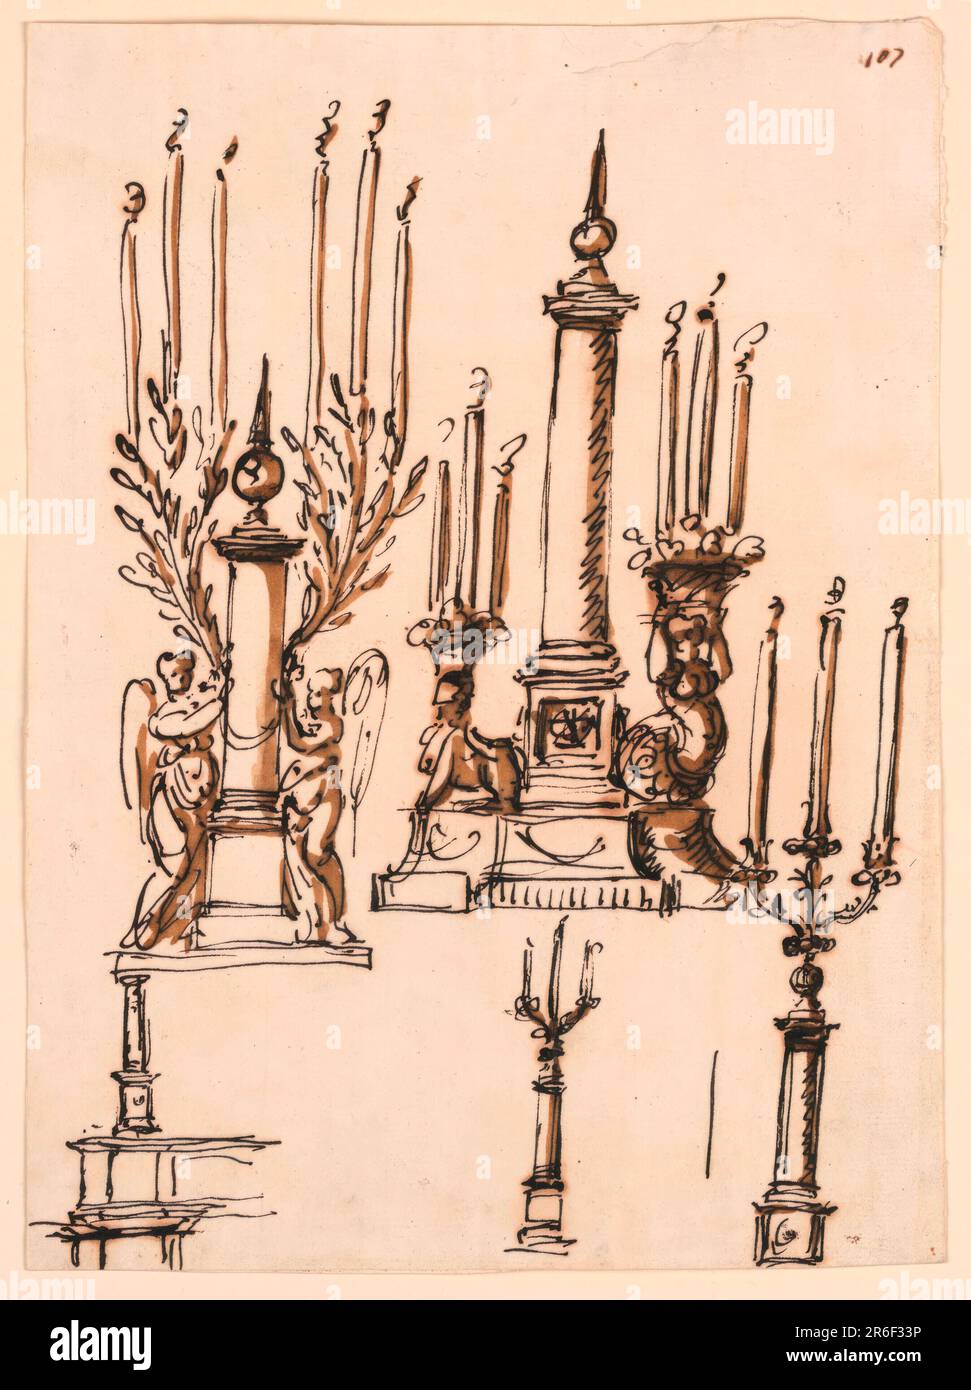 Upper row, at left: Two winged women stand beside a columna miliaria supporting brackets springing from it laterally, consisting of three branchces with burning candles. At right, with alternative suggestions: in the center of a base rises a columna miliaria, flanked at left by a sitting sphinx with a basket upon her head from which three burning candles spring, at right by a half-figure with a similar basket upon the head. Lower row, at left: a column standing near the end of a parapet. Center: a sketch like -2023, above, at left. At right: a similar design on a larger scale. Date: ca. 1790. Stock Photo